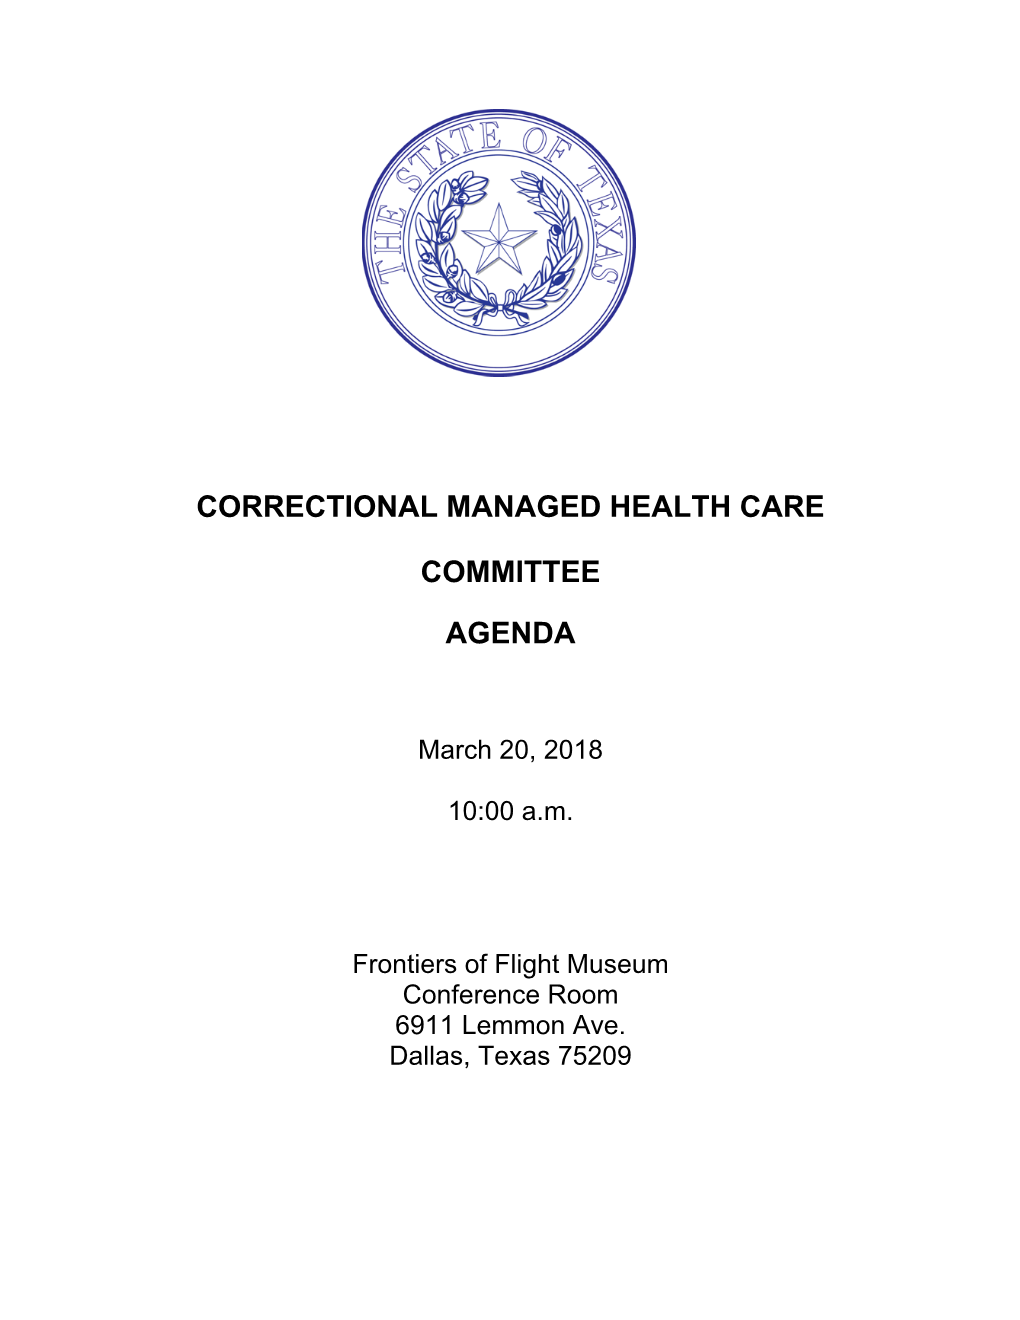 CORRECTIONAL MANAGED HEALTH CARE COMMITTEE March 20, 2018 10:00 A.M